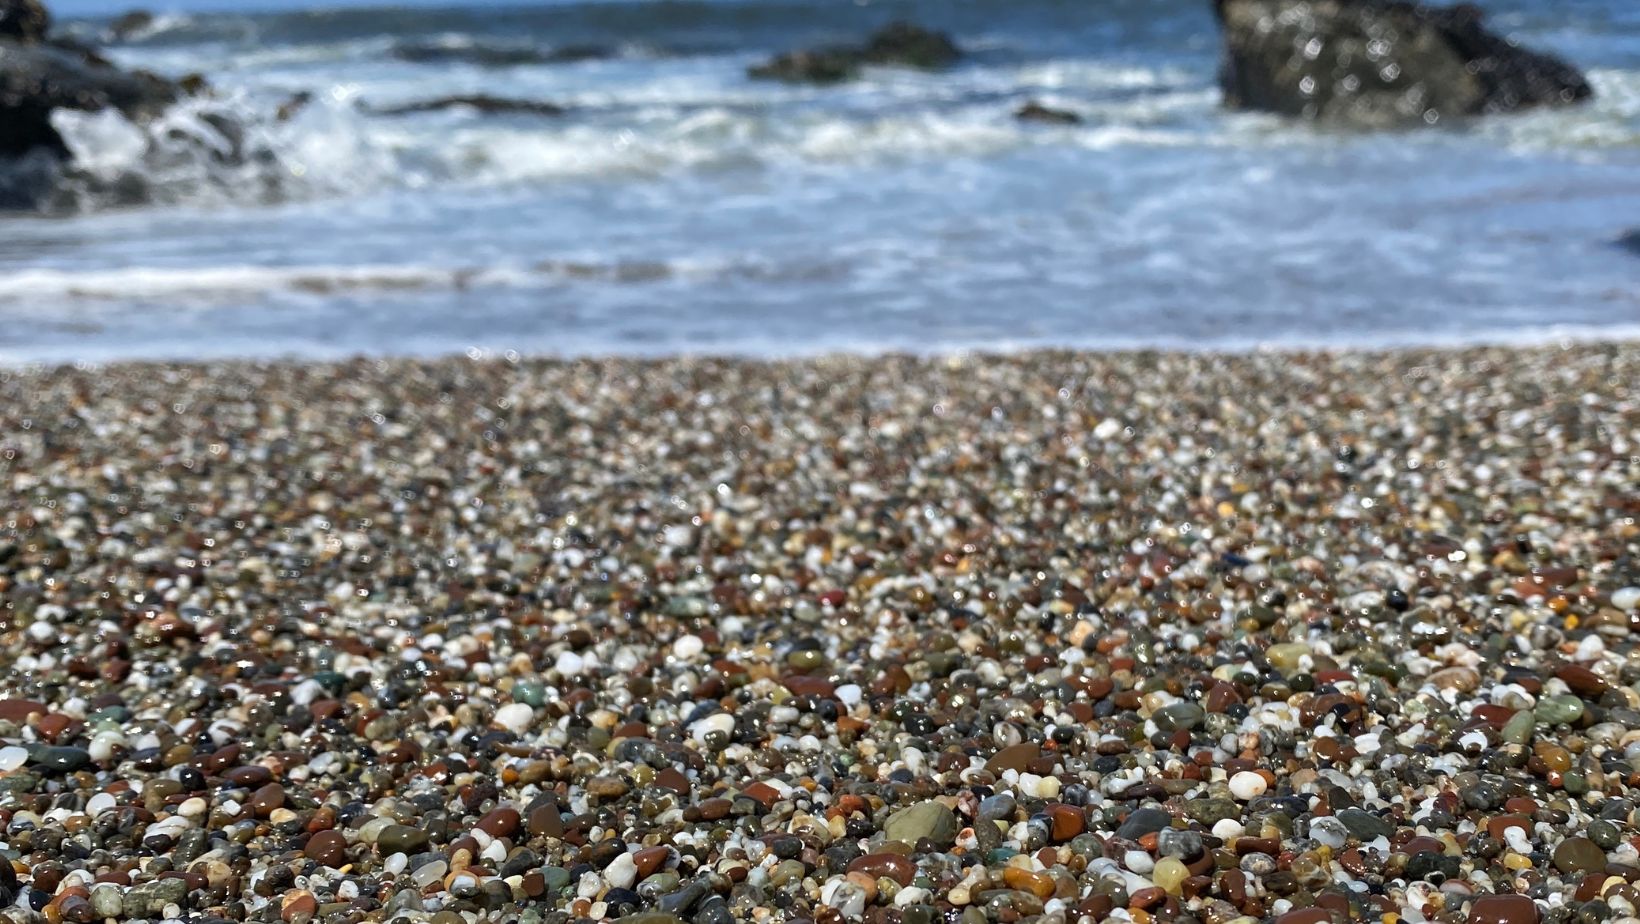 Close up of wet beach stones at the shoreline and ocean in the background